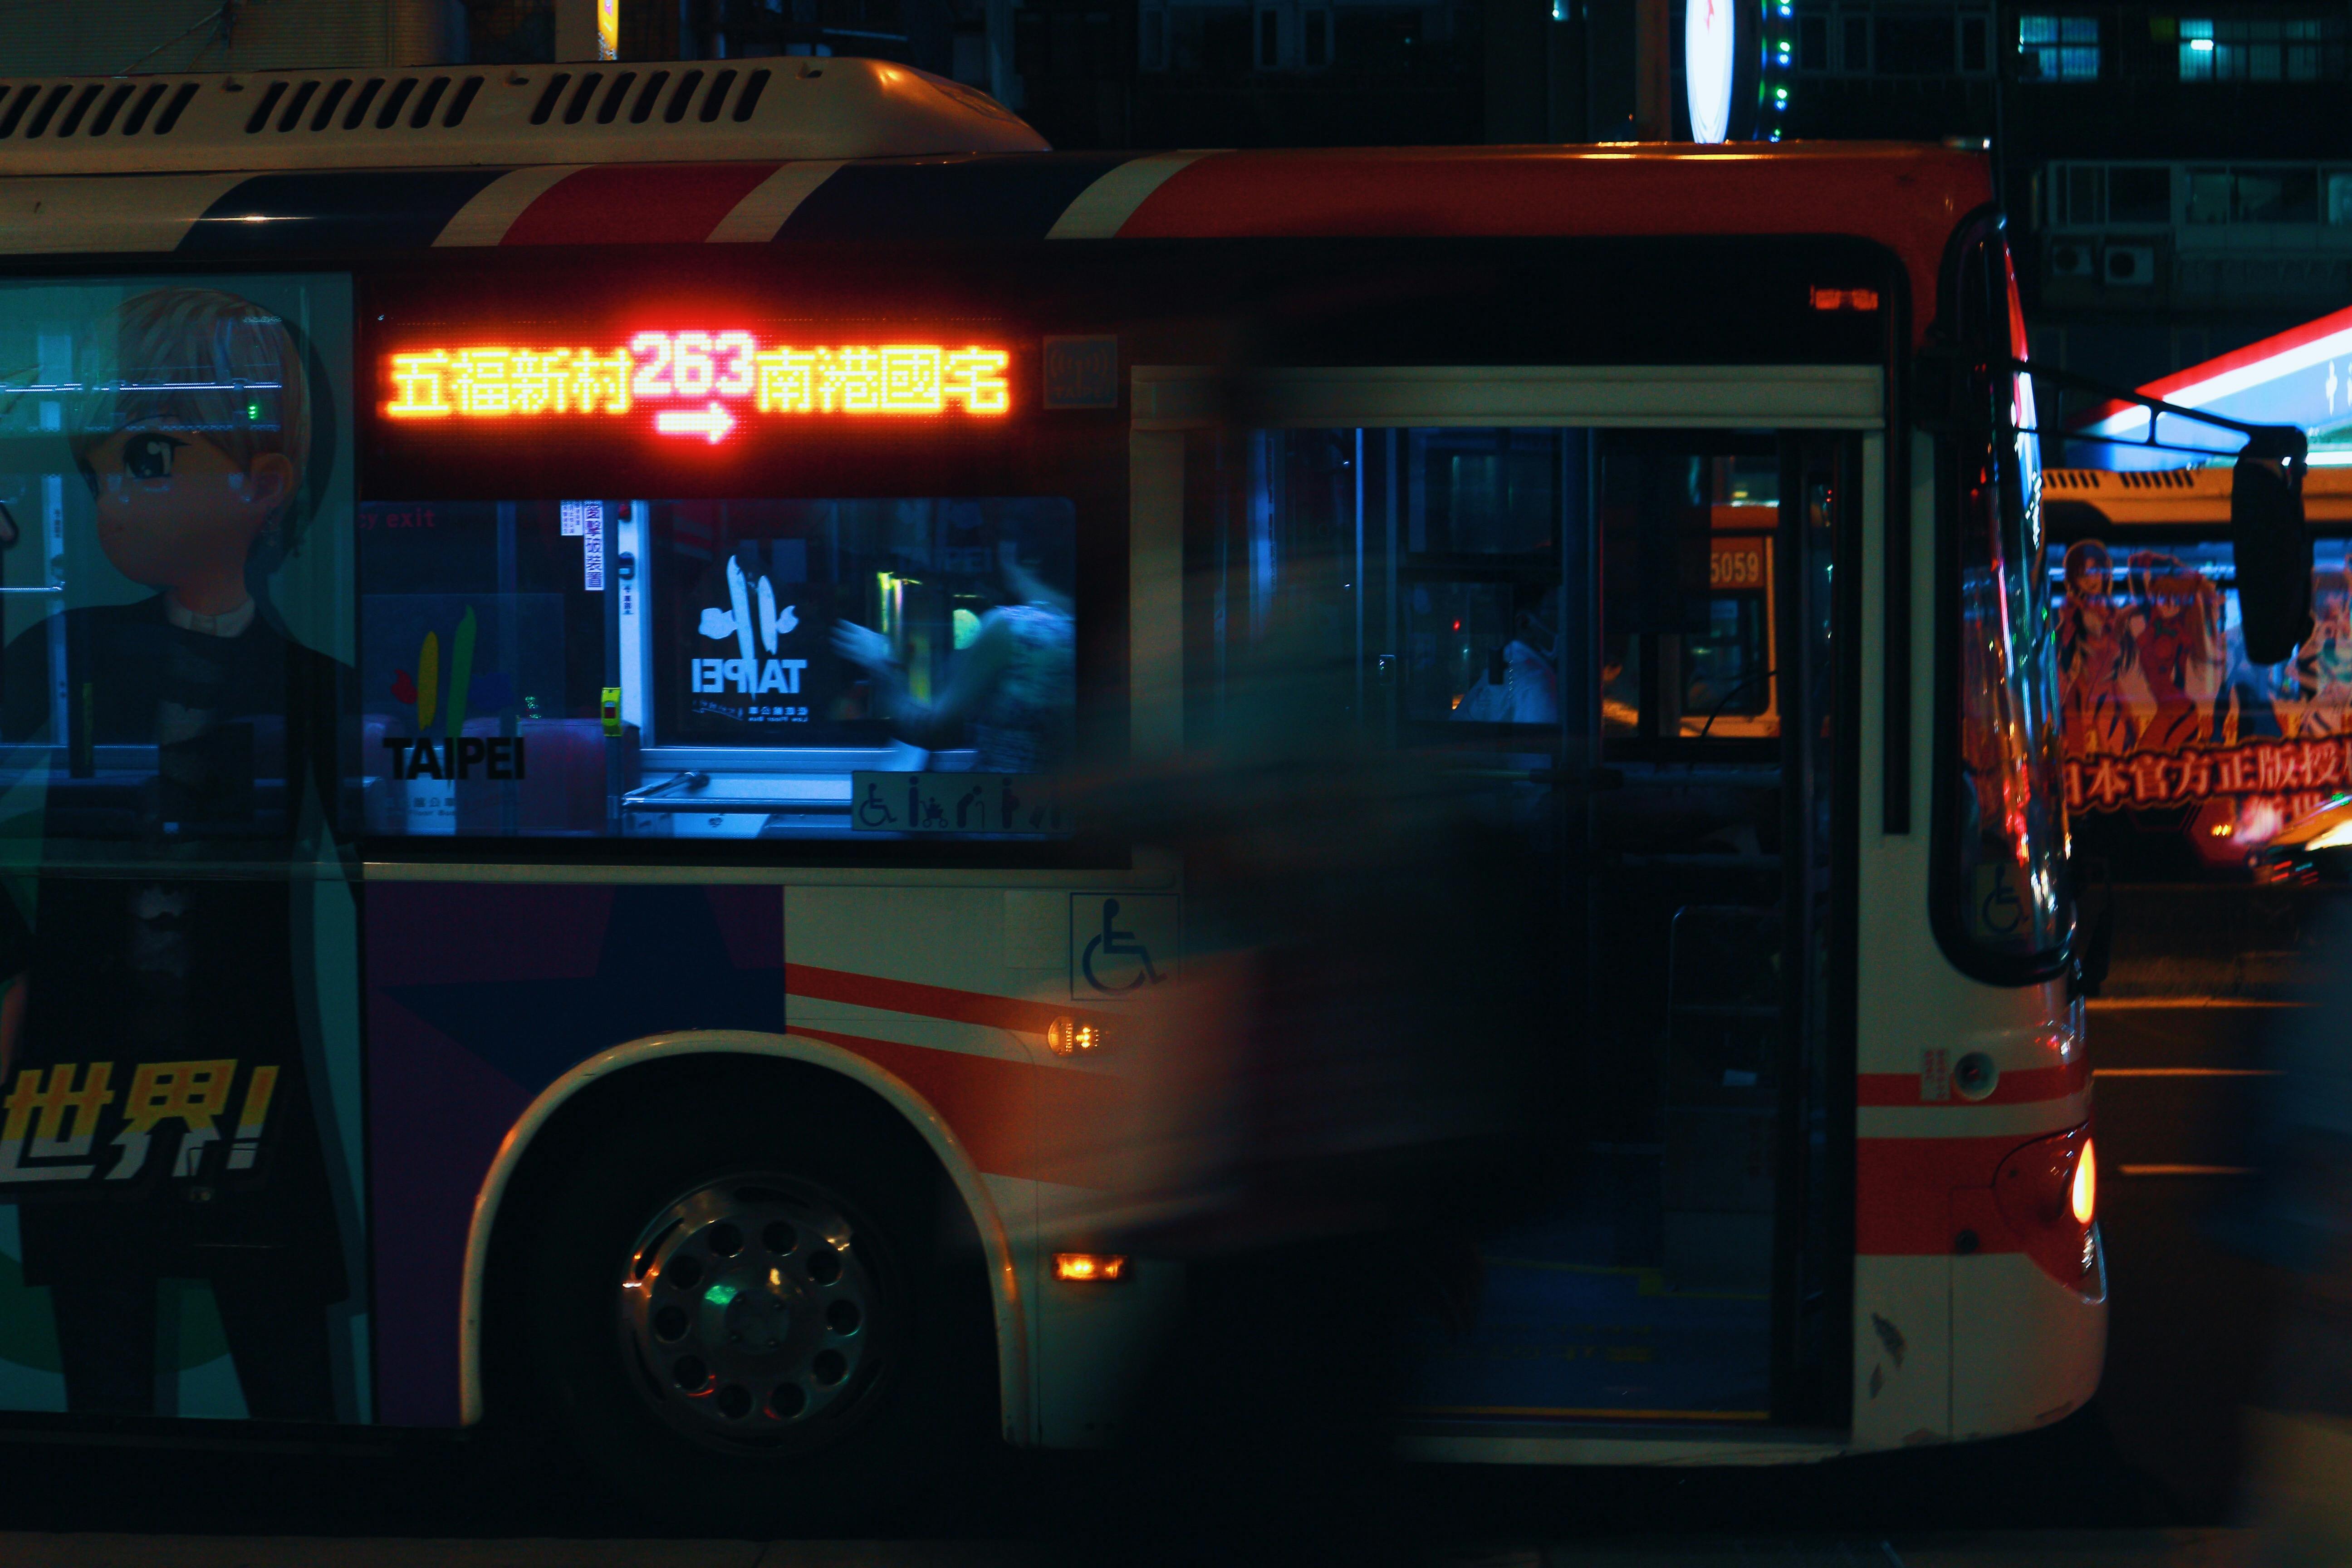 Silver City Bus on a City Street at Night · Free Stock Photo